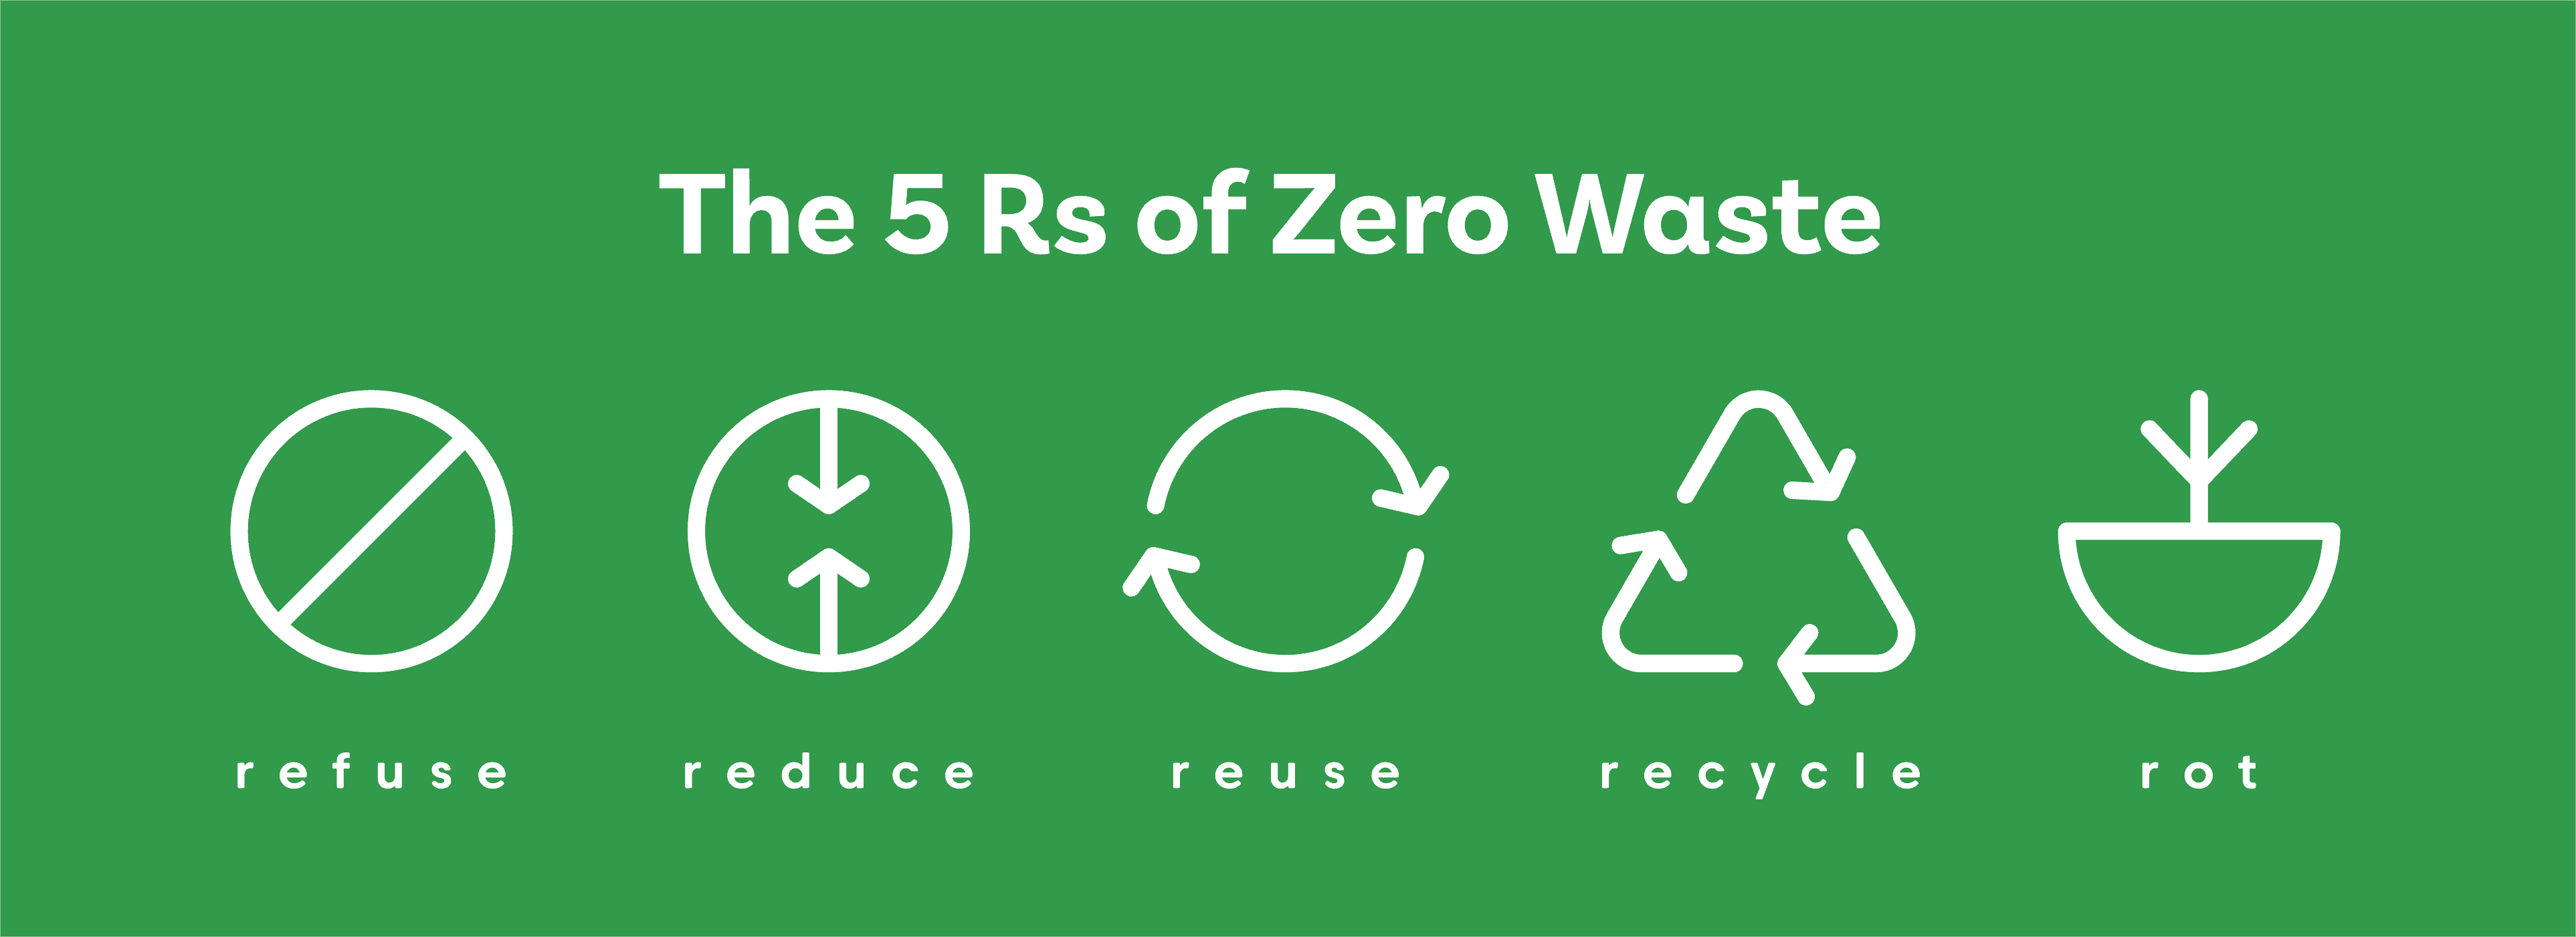 The 5 Rs of Zero Waste